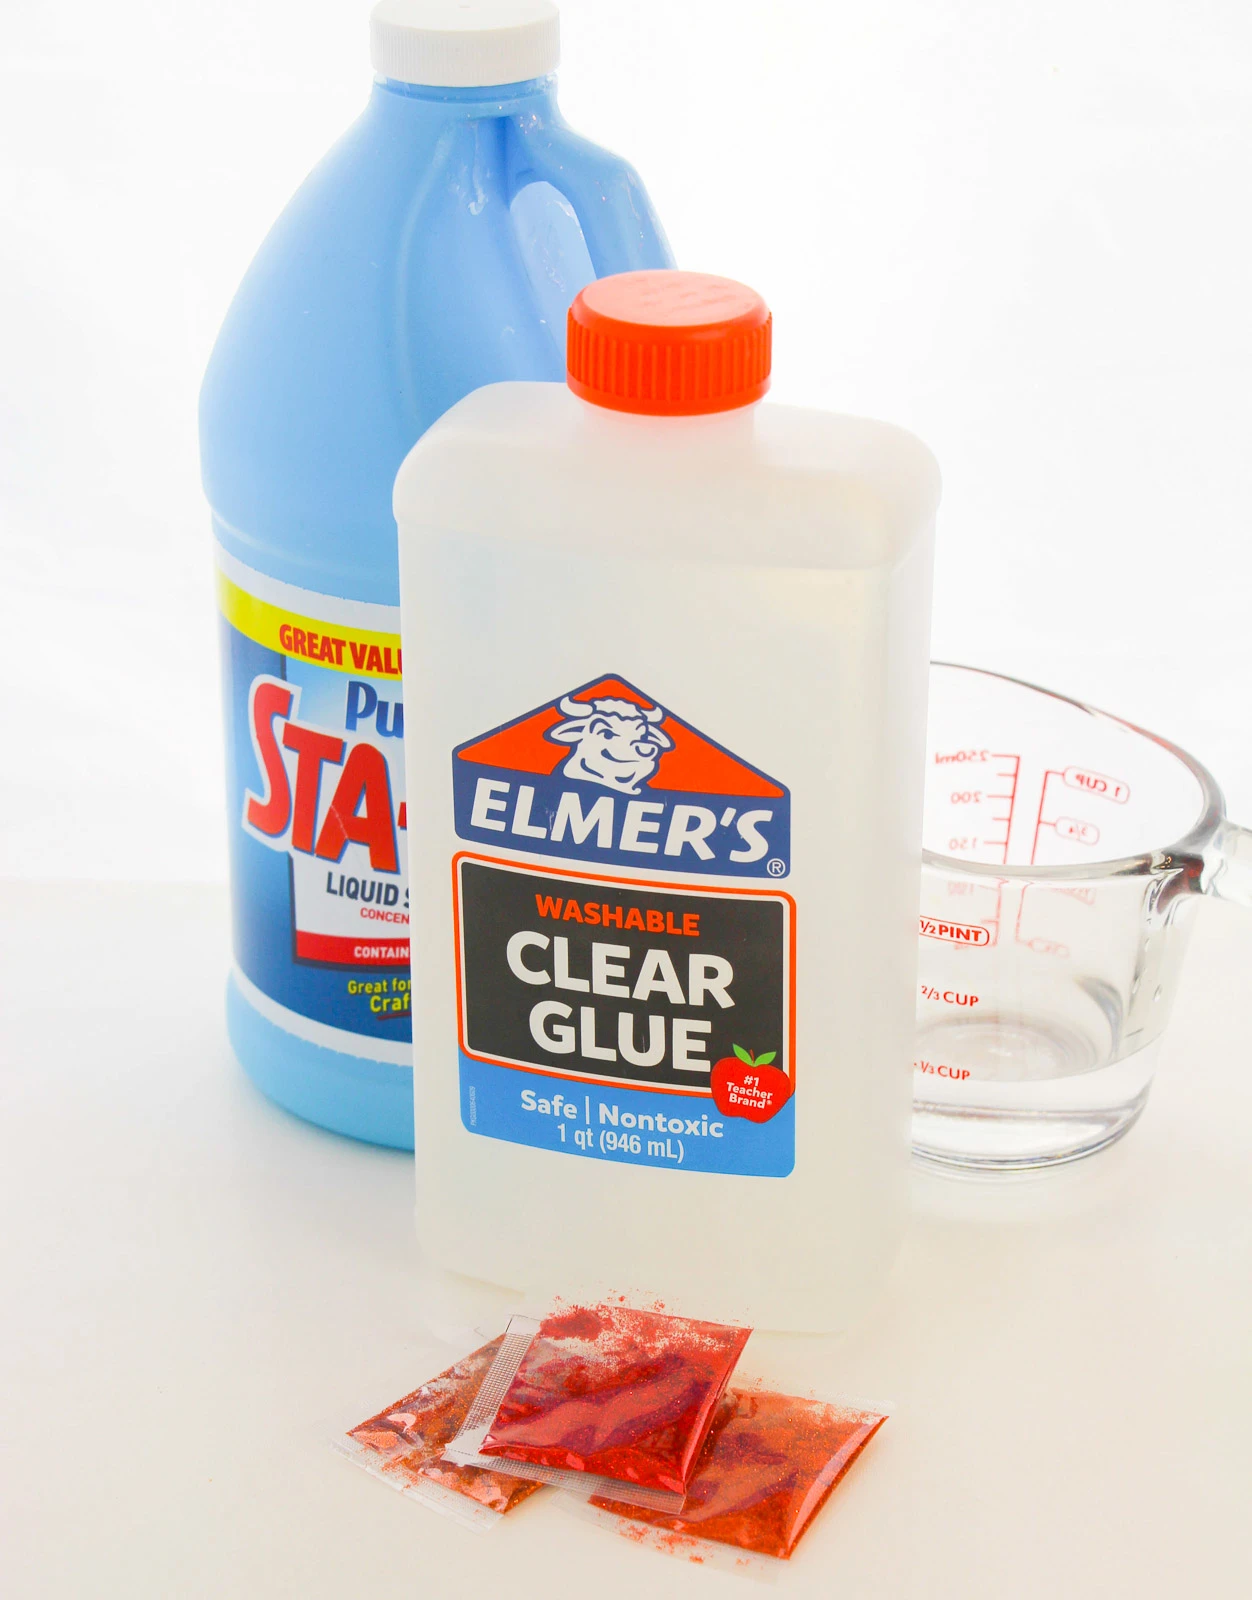 ingredients to make fall slime: glue, liquid starch, glitter, water